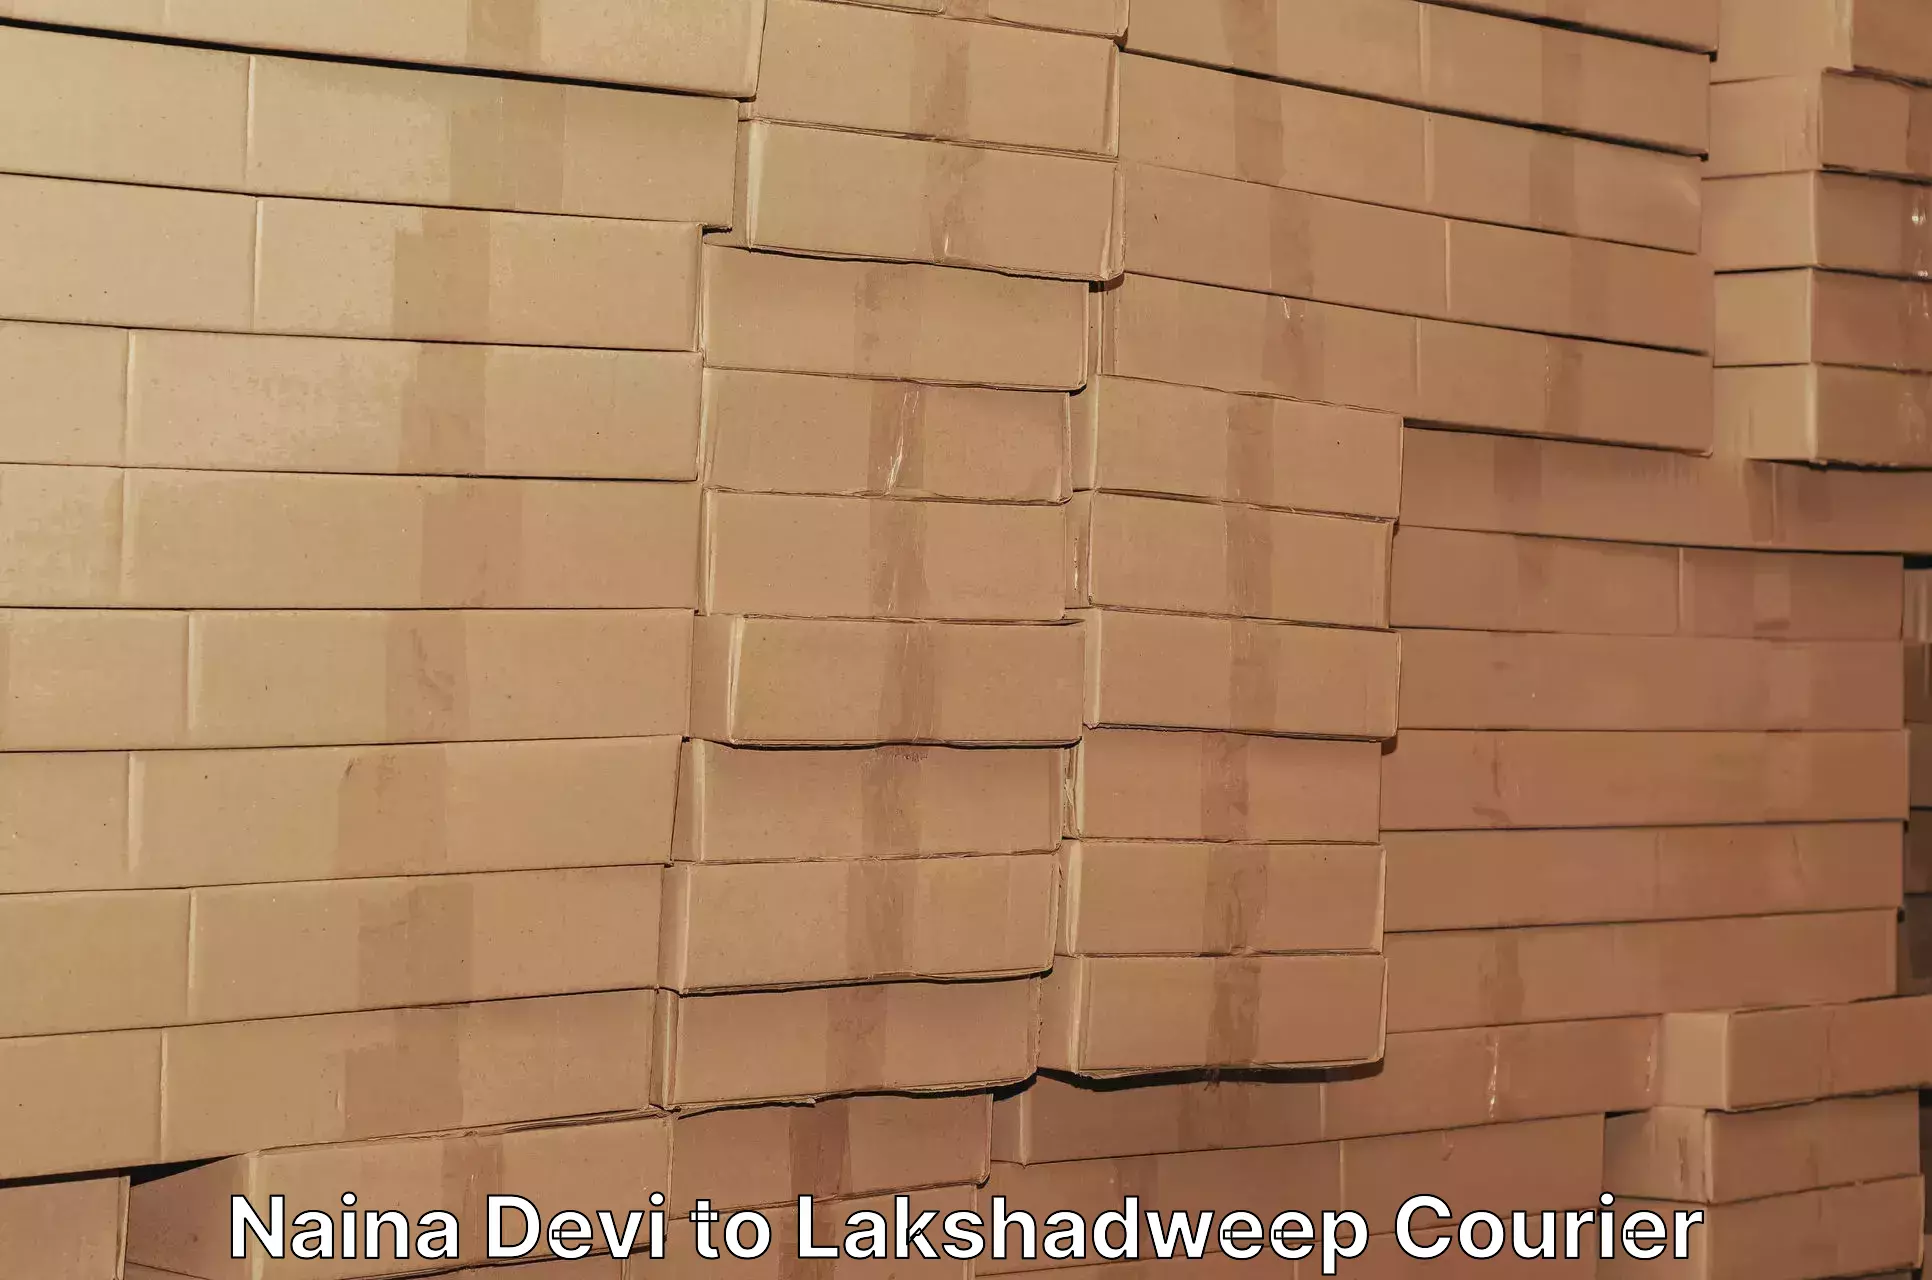 Business logistics support in Naina Devi to Lakshadweep